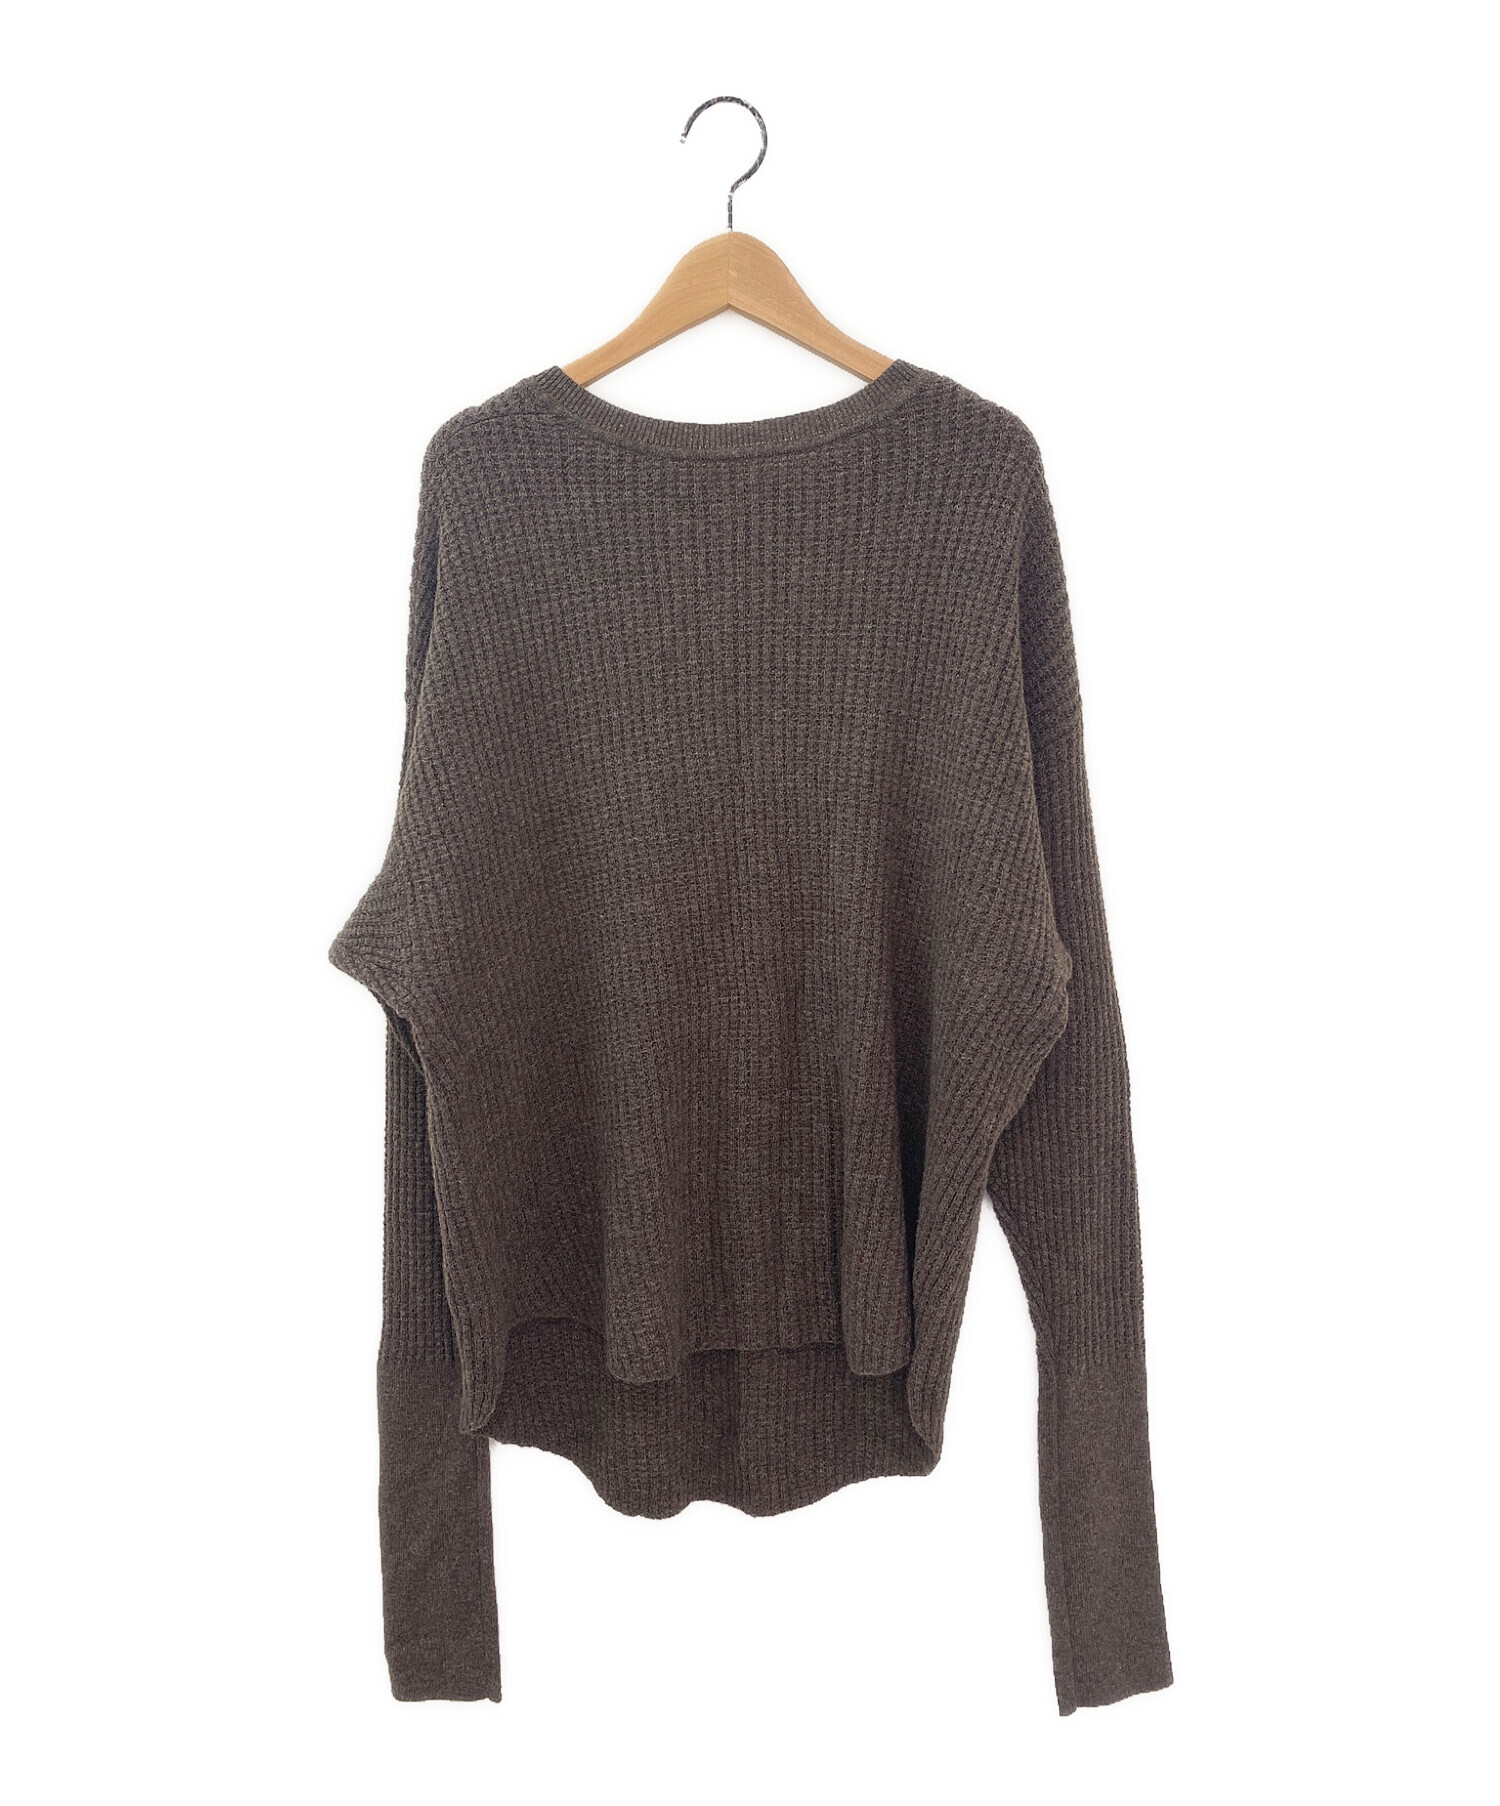 L'Appartement Thermal Knit ブラウン